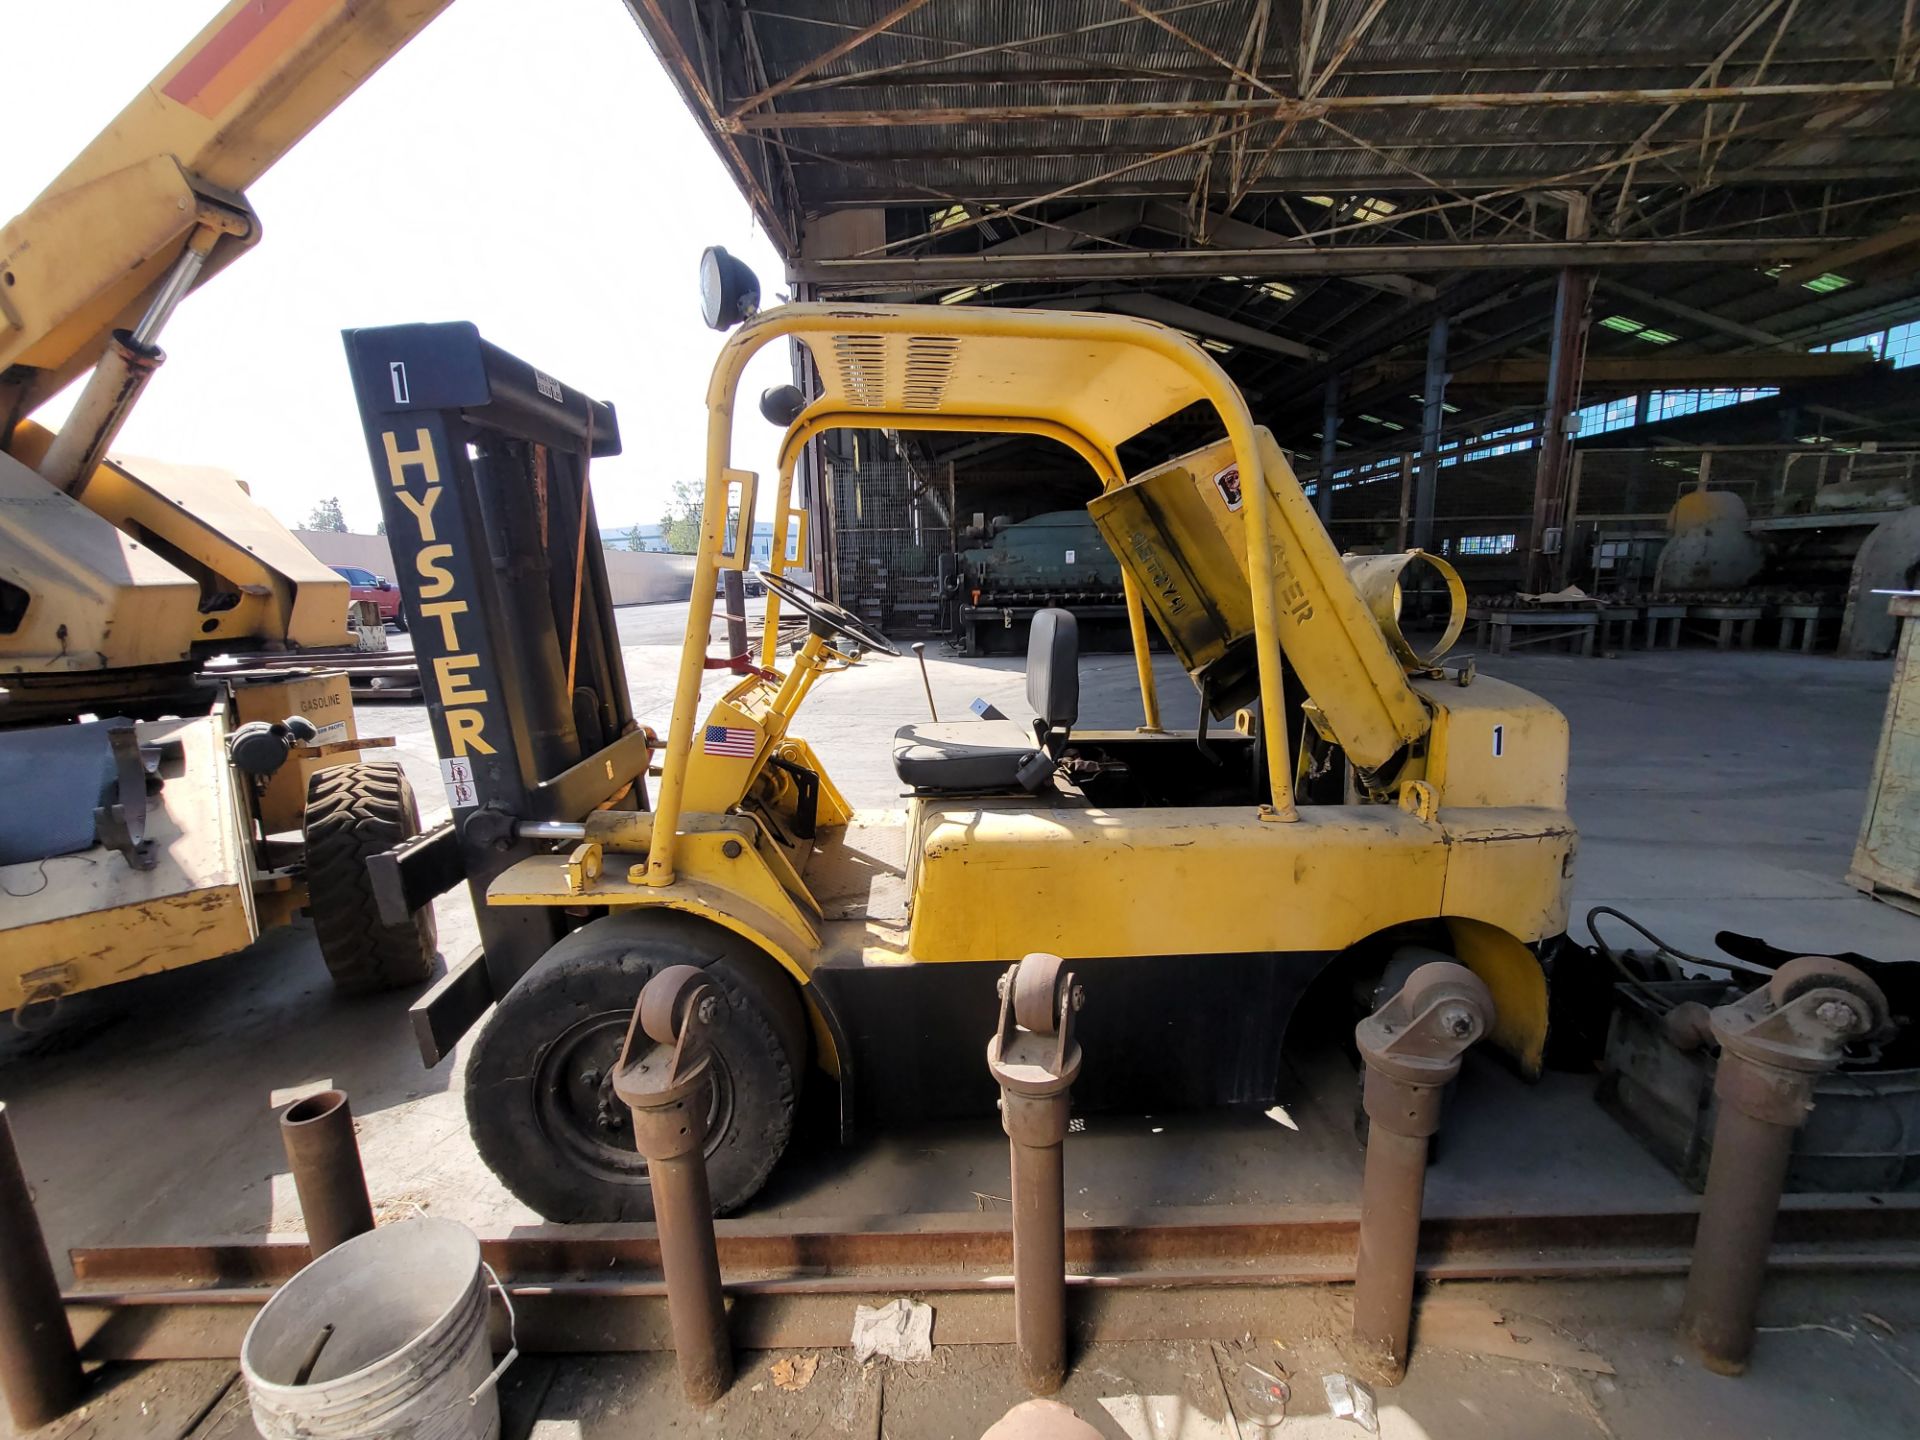 HYSTER H80C LPG FORKLIFT (NO ENGINE!), 8,000 LB CAPACITY, NO FORKS, 2-STAGE MAST, SOLID TIRES, - Image 2 of 8